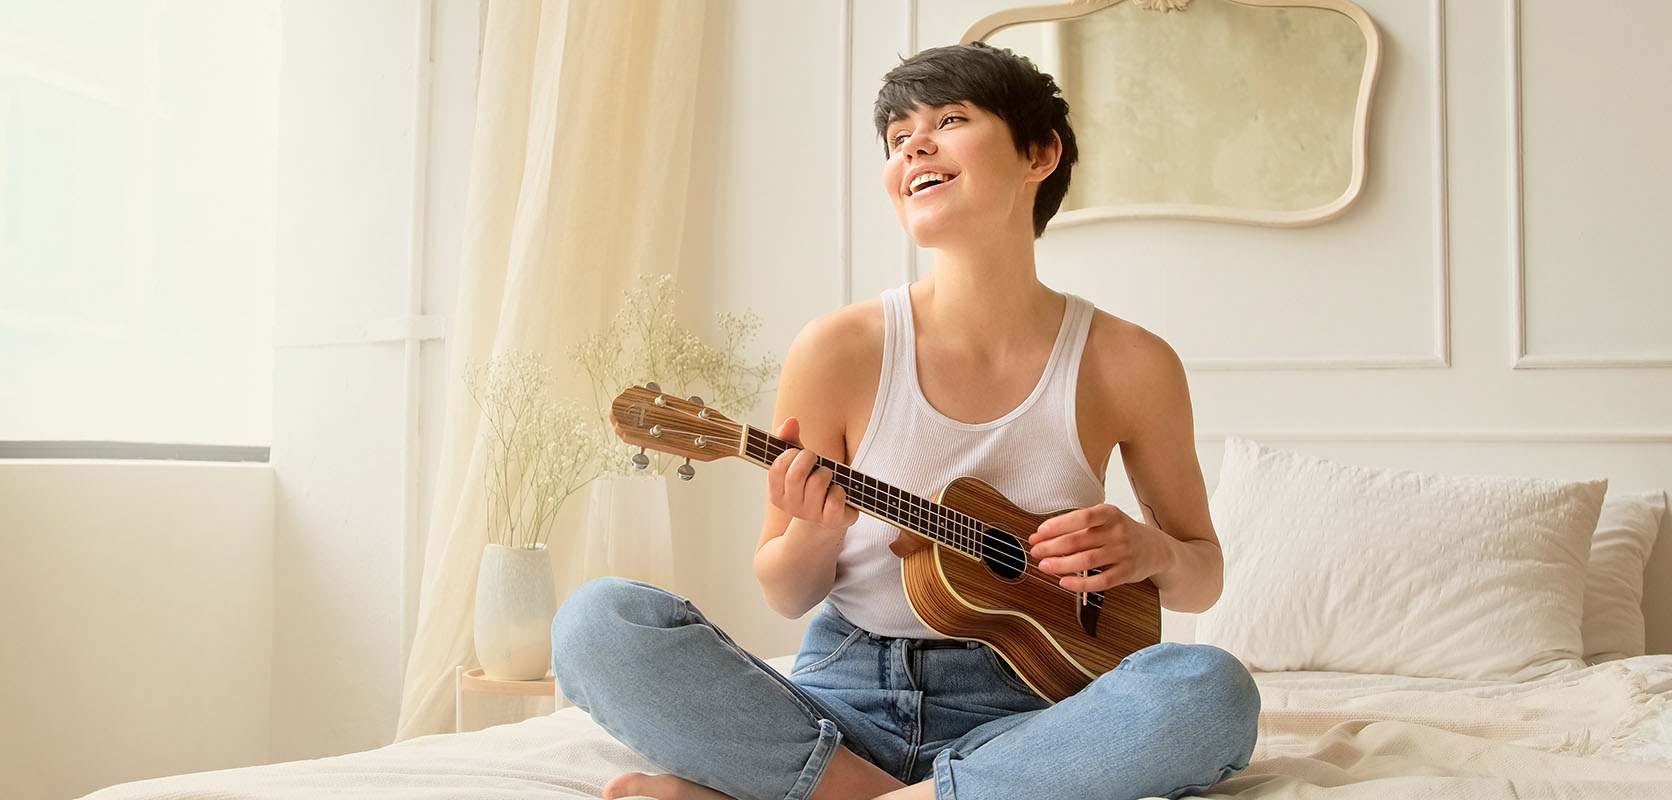 woman playing guitar on her bed after buying weed online from low price bud online dispensary and mail order marijuana weed shop.